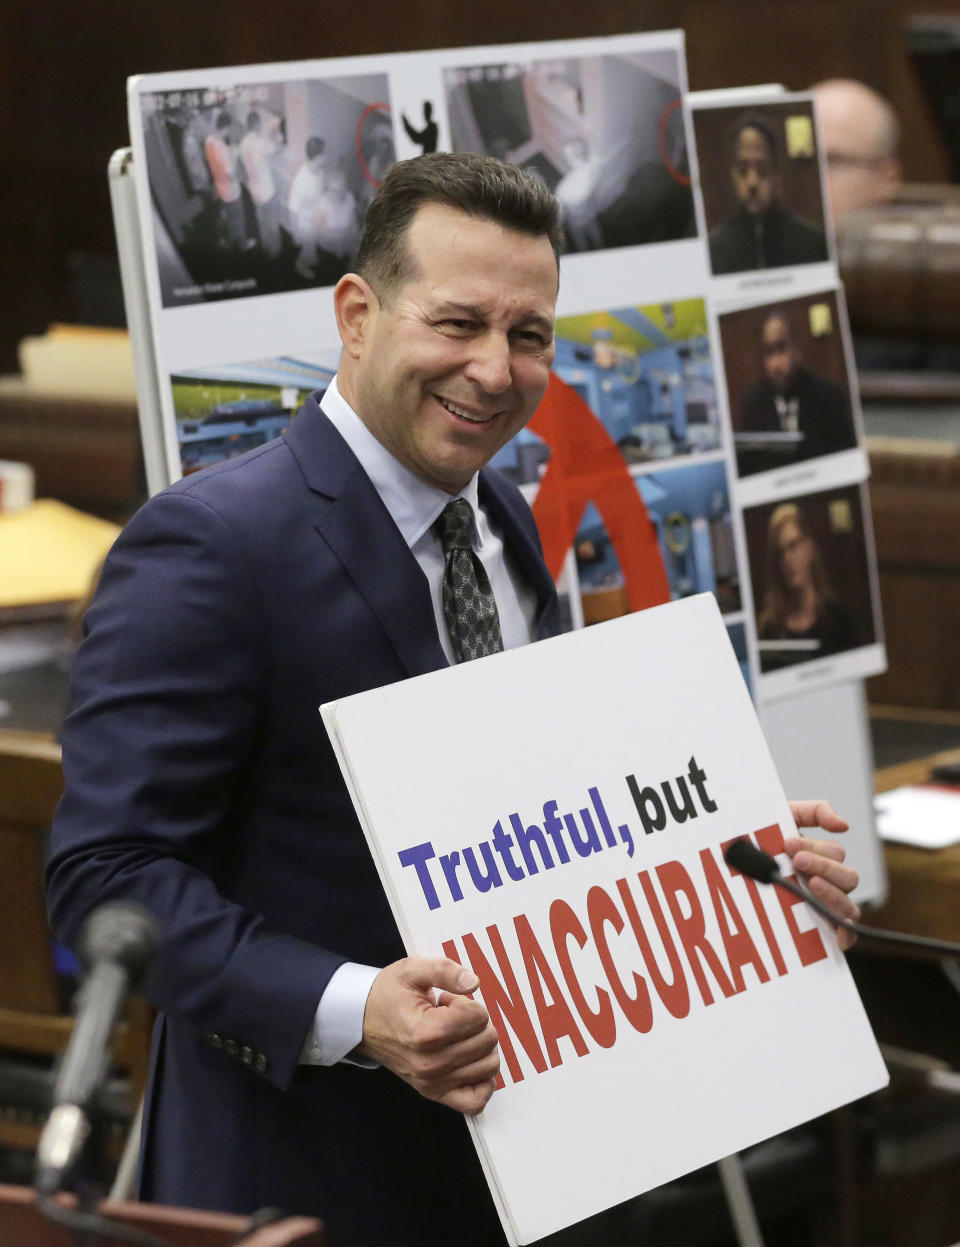 Defense attorney Jose Baez holds a placard while presenting closing arguments in the trial of former New England Patriots tight end Aaron Hernandez, at Suffolk Superior Court, Thursday, April 6, 2017, in Boston. Hernandez is on trial for the July 2012 killings of Daniel de Abreu and Safiro Furtado who he encountered in a Boston nightclub. The former NFL player is already serving a life sentence in the 2013 killing of semi-professional football player Odin Lloyd. (AP Photo/Steven Senne, Pool)